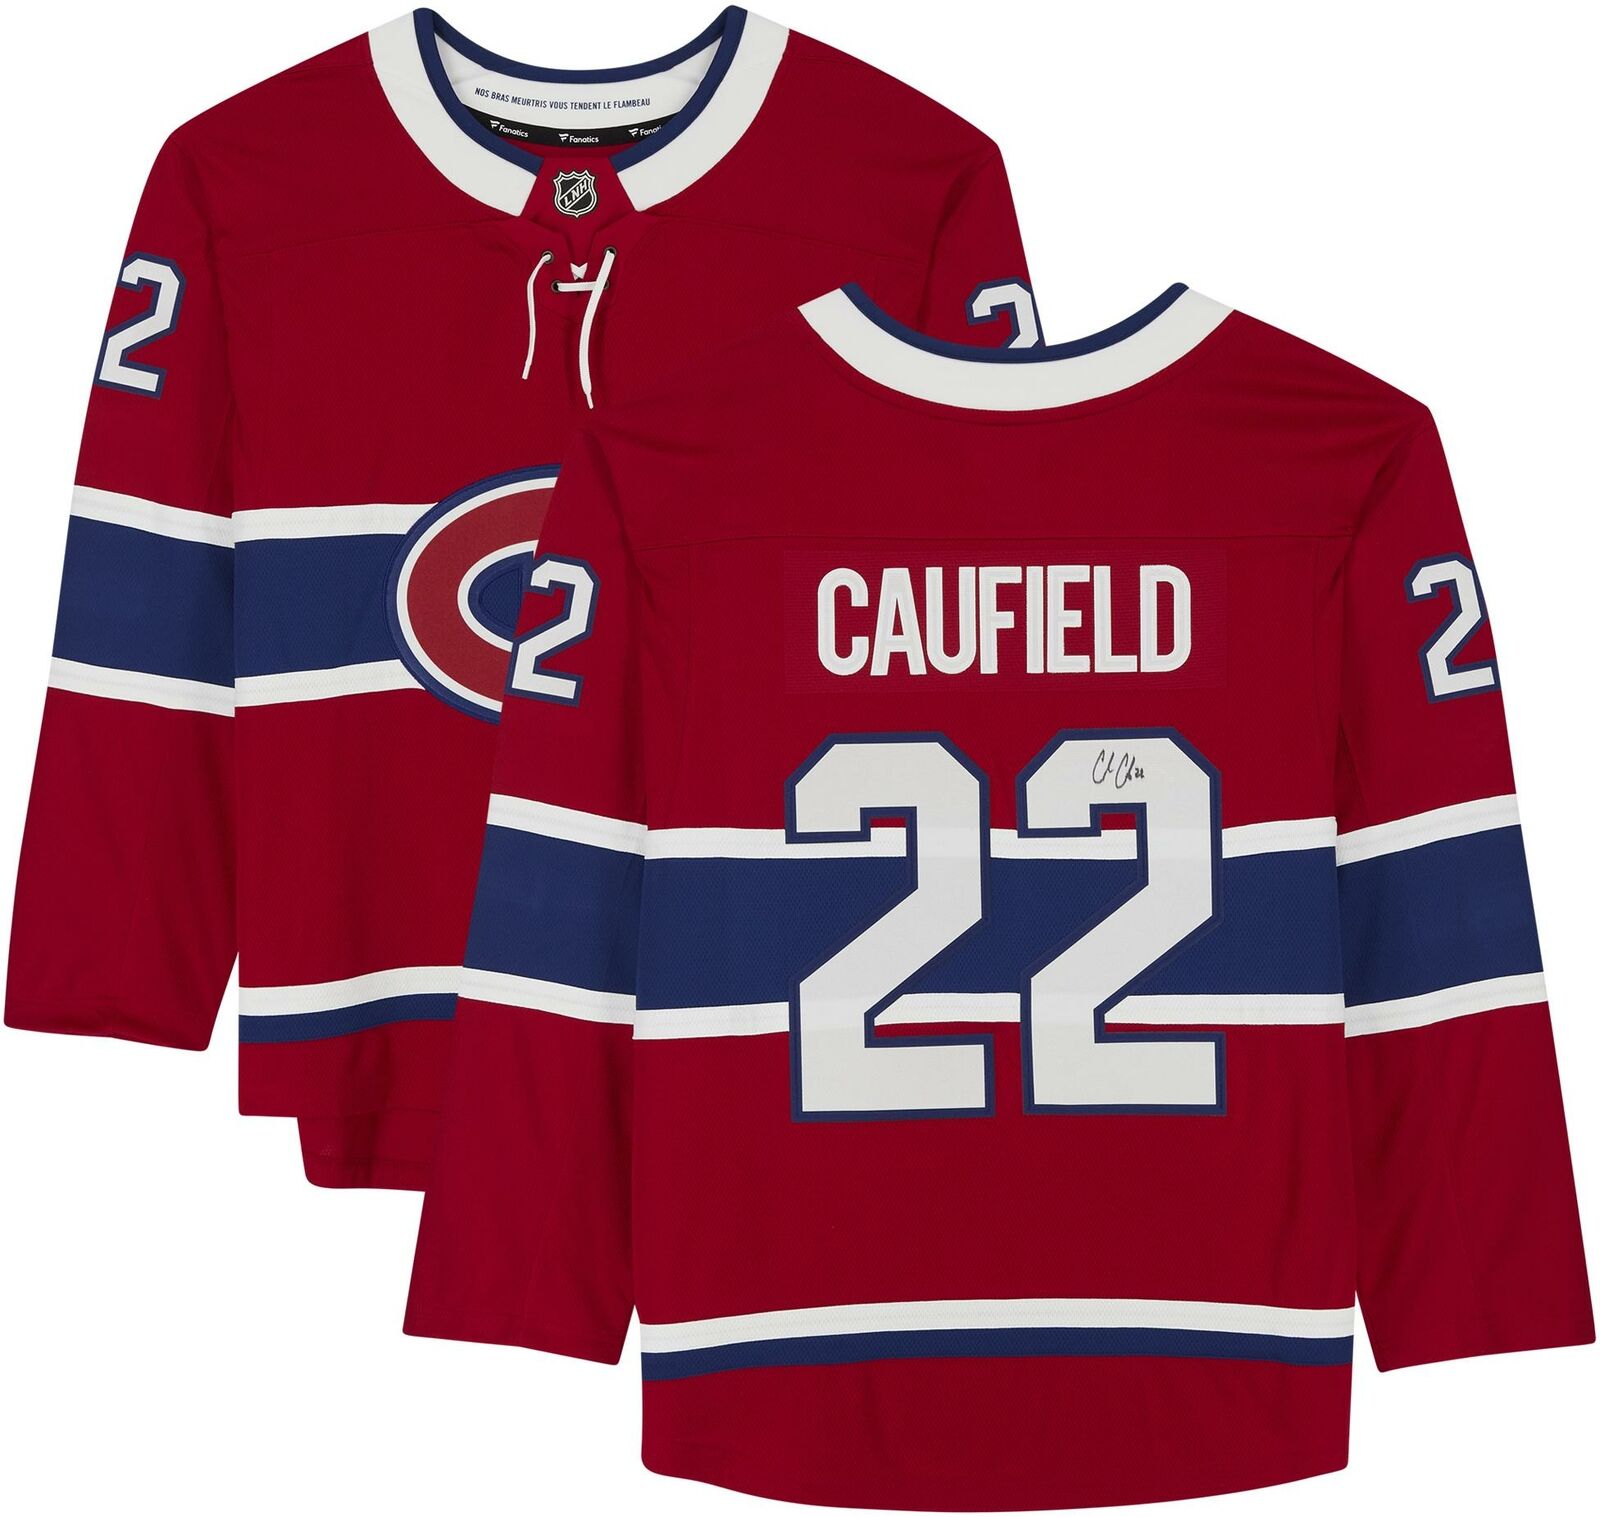 Cole Caufield Montreal Canadiens Autographed Red Fanatics Breakaway Jersey